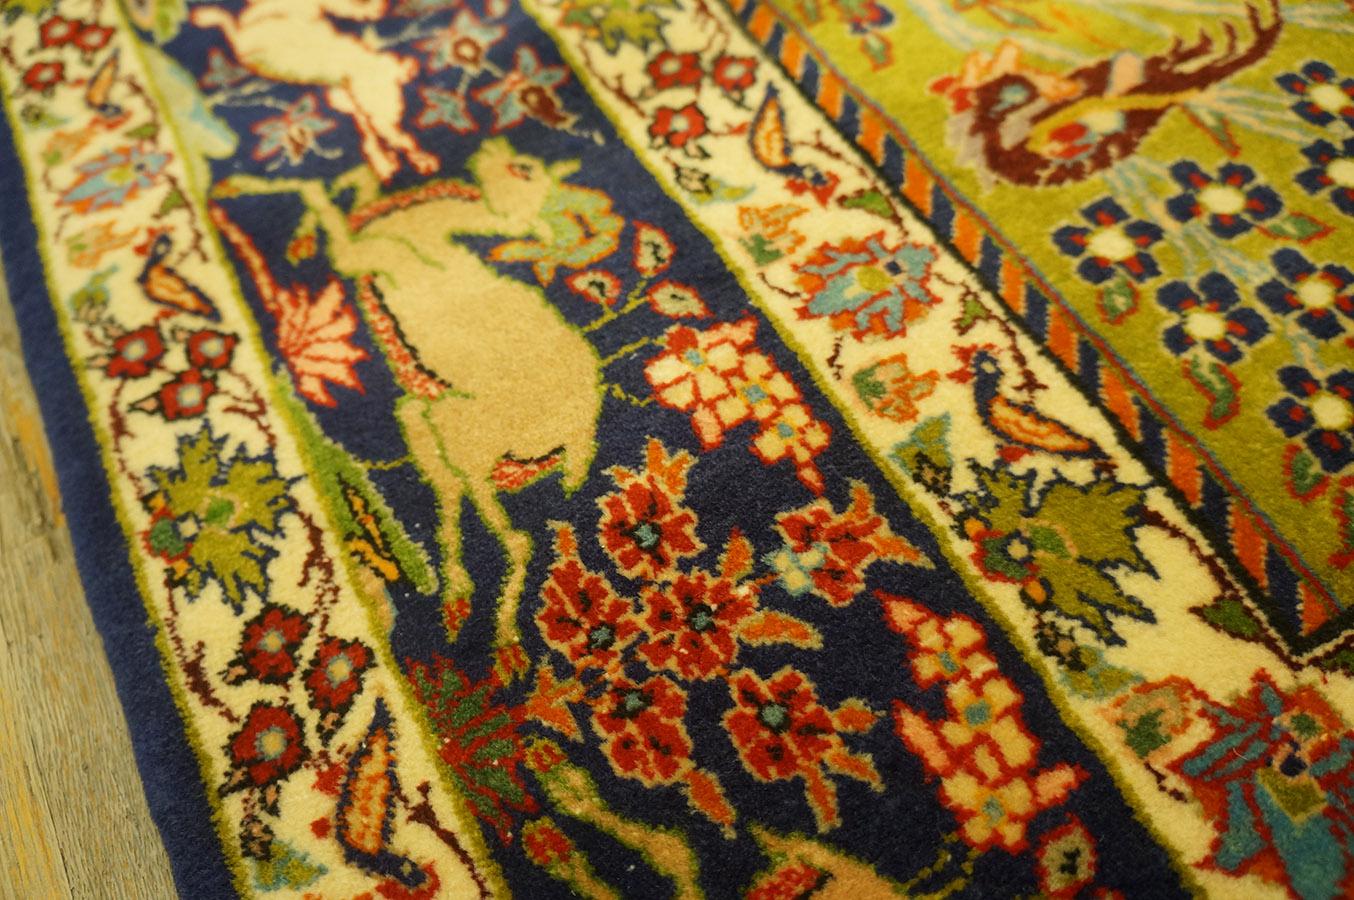 Mid 20th Century Persian Isfahan Carpet ( 3' 6'' x 5' 4'' - 107 x 163 cm) For Sale 5